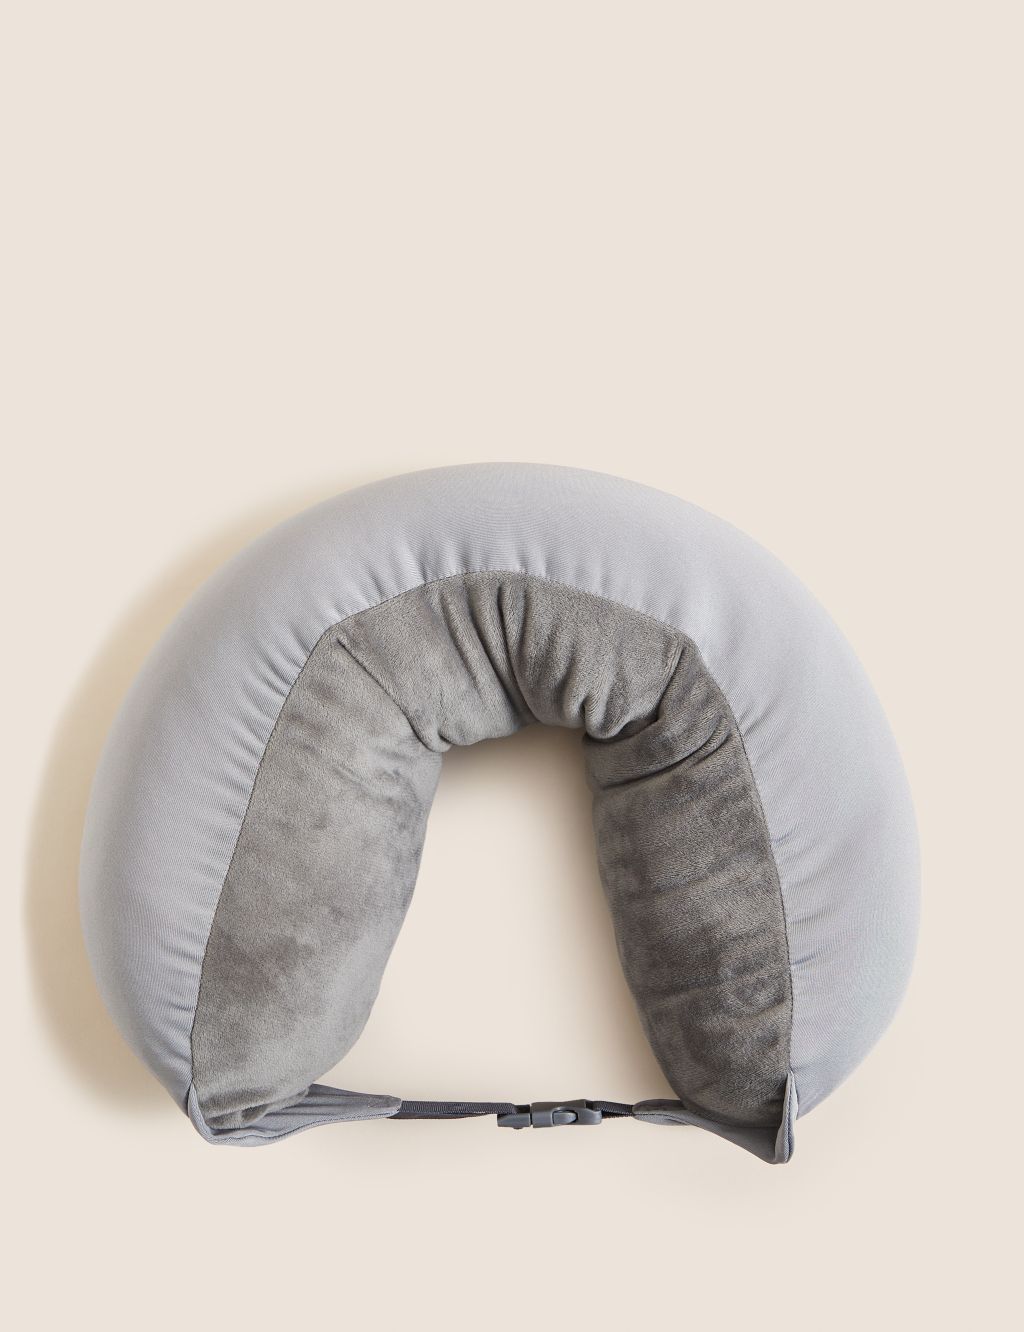 Two Way Travel Pillow image 1